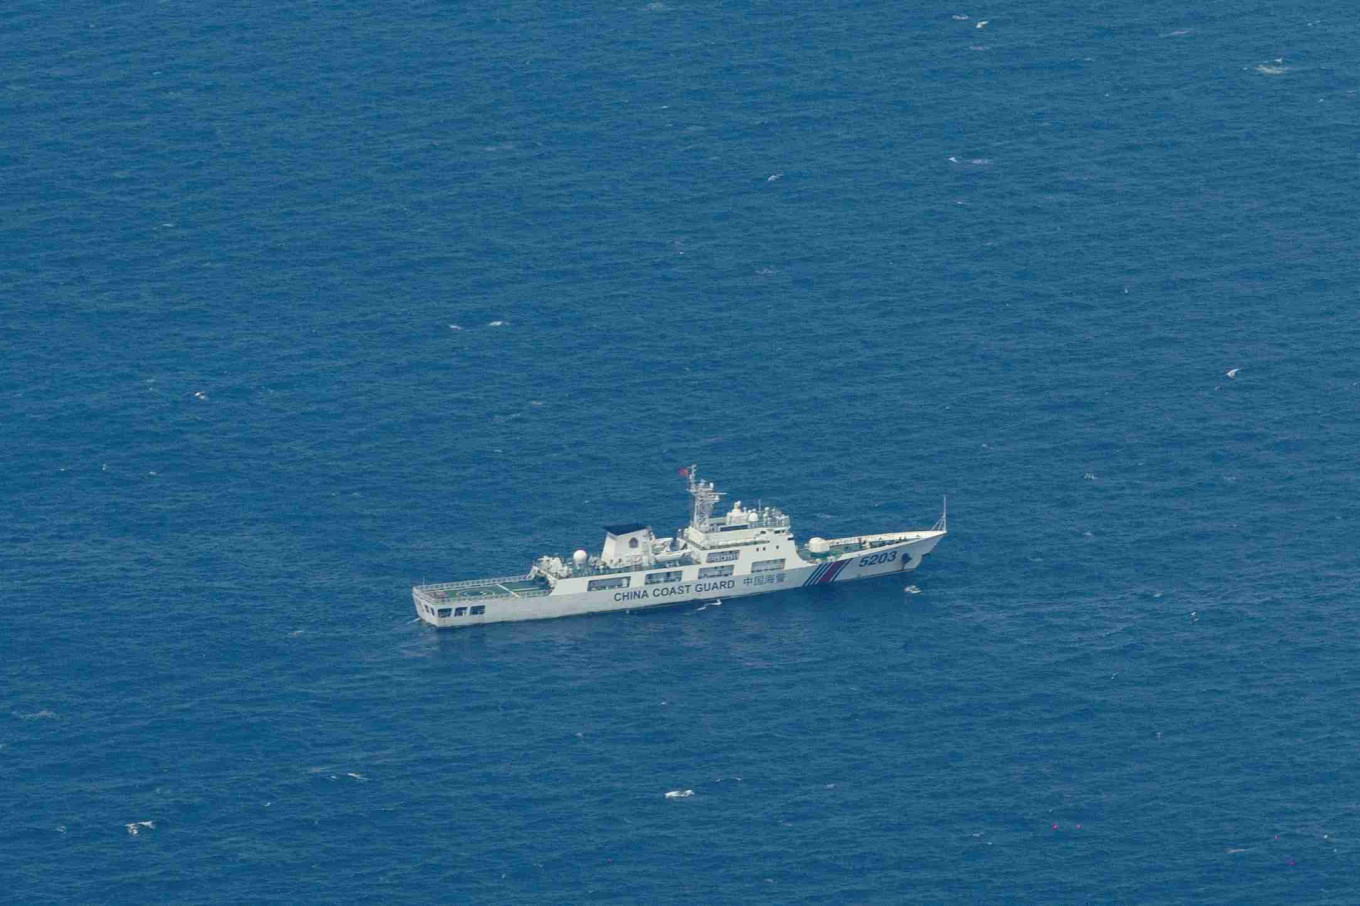 Philippines reports "confrontation" with Chinese vessels in South China Sea